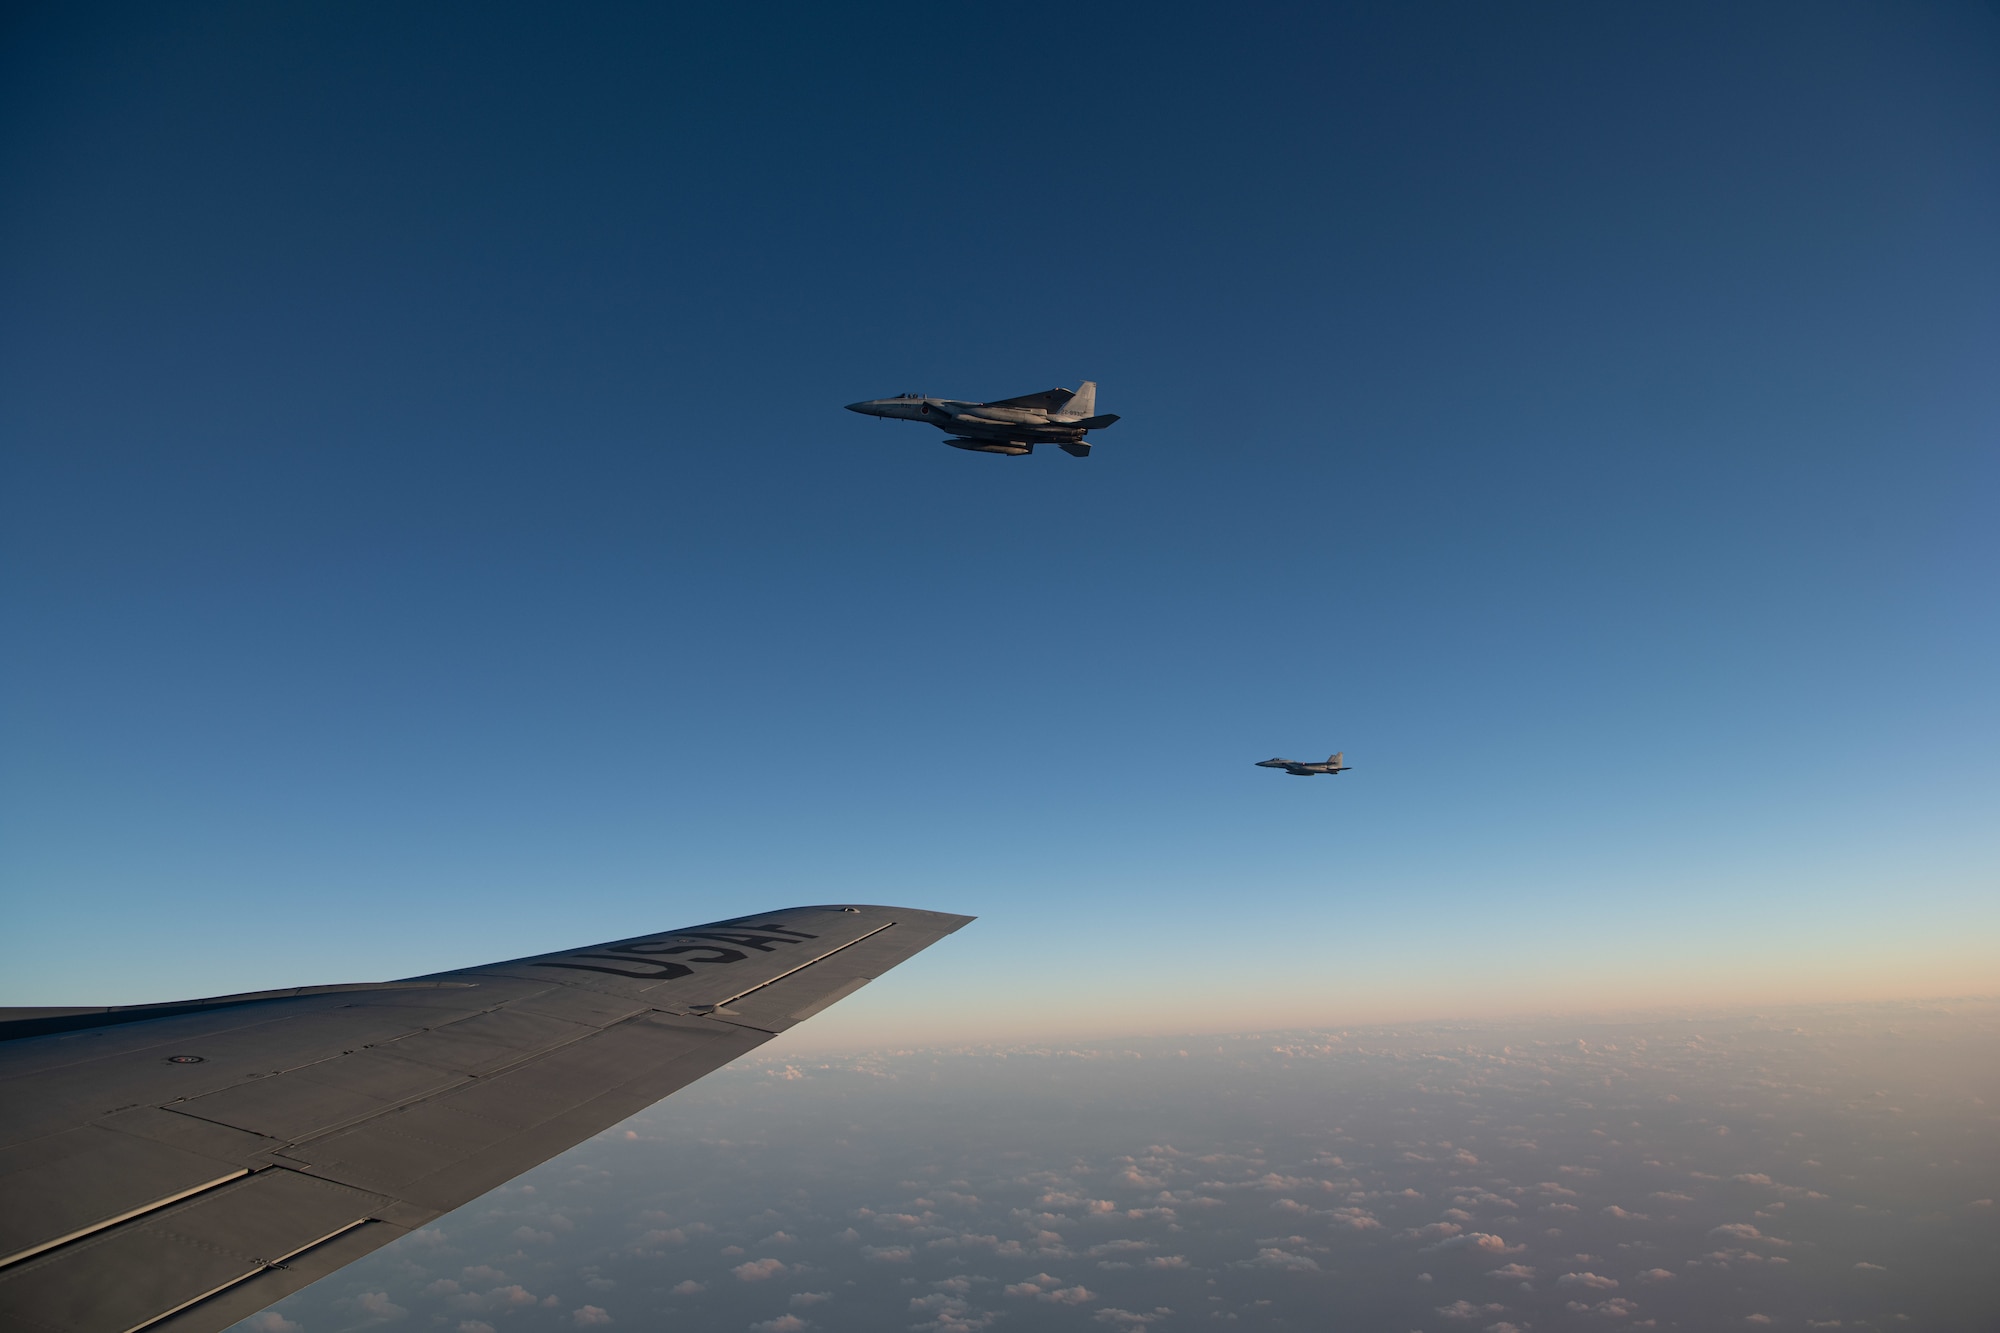 Two Japan Air Self-Defense Force F-15DJ Eagles fly next to a U.S. Air Force KC-135 Stratotanker from the 909th Air Refueling Squadron after refueling over the Pacific Ocean during Exercise Southern Beach, Oct. 28, 2021. The large force exercise primarily focused on offensive and defensive counter air operations, personnel rescue, and airdrop missions. (U.S. Air Force photo by Staff Sgt. Savannah L. Waters)